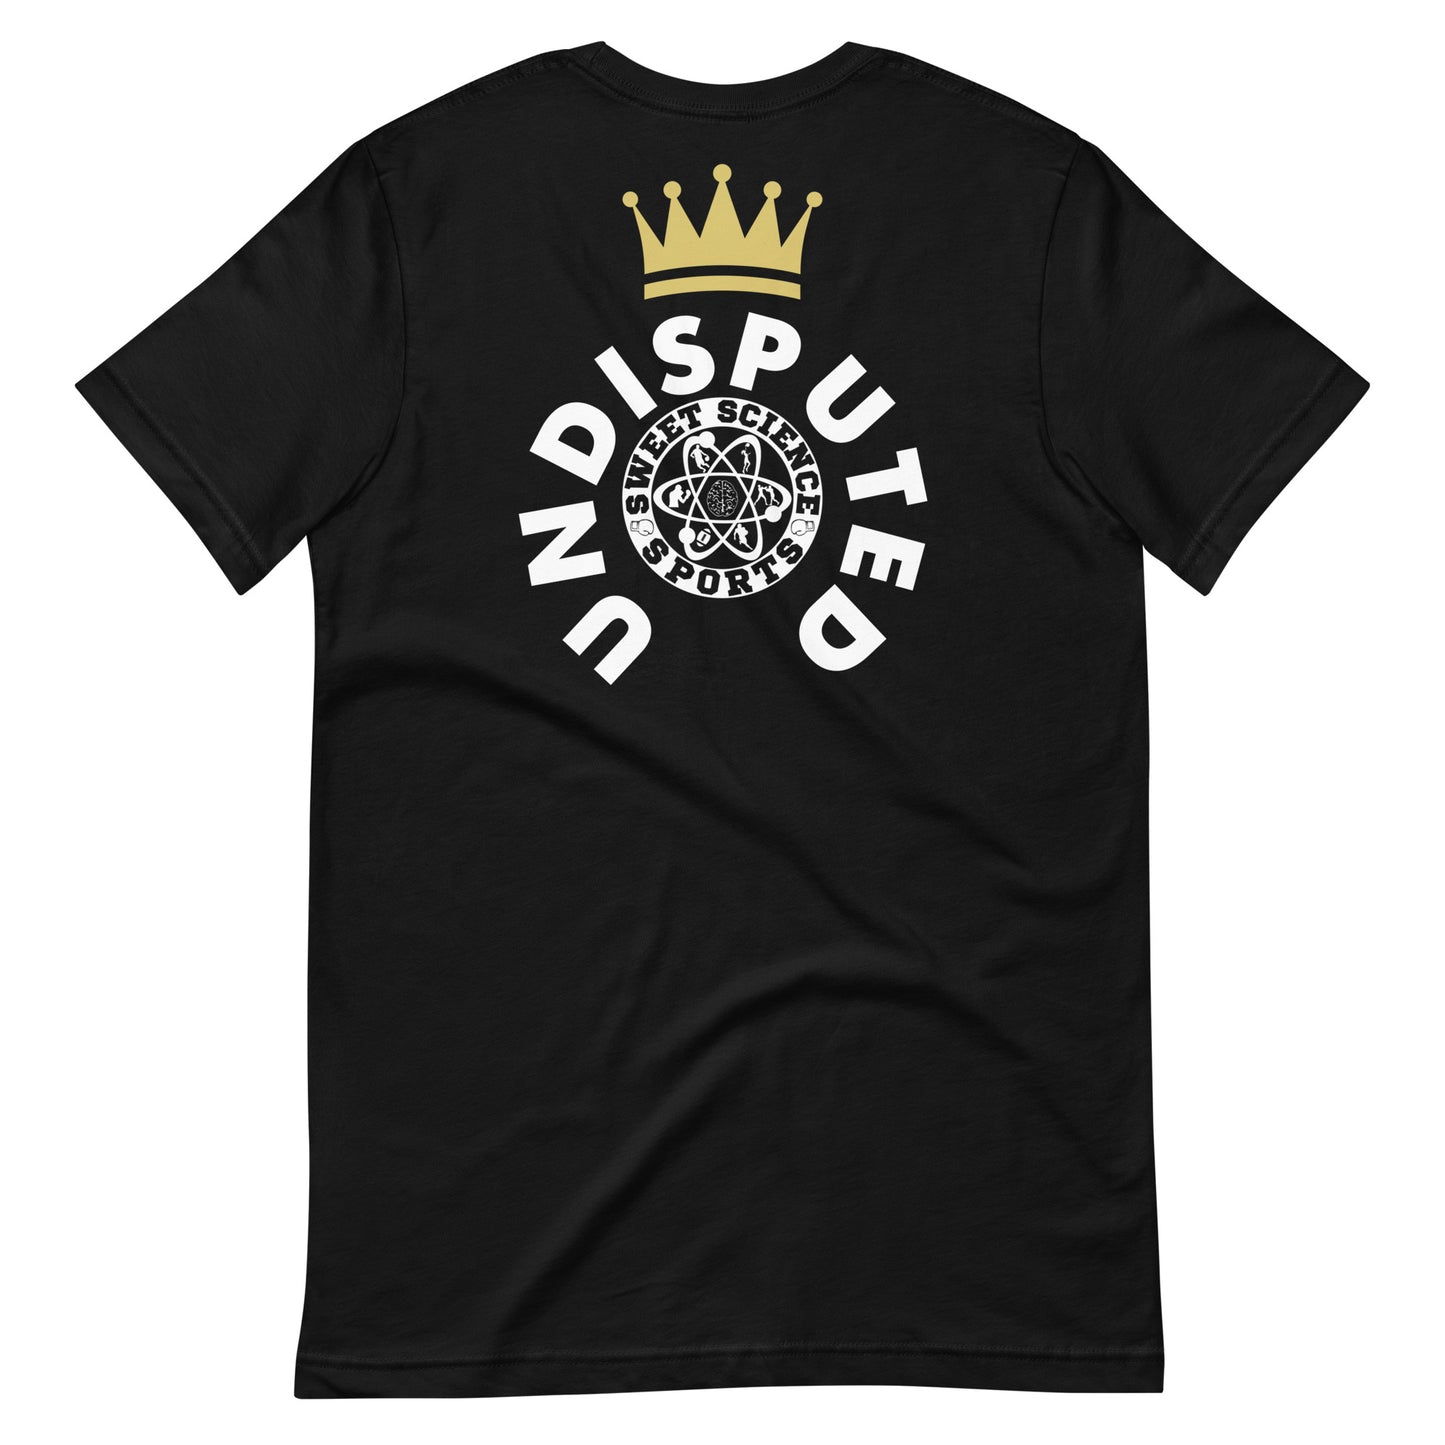 Sweet Science Sports Undisputed Unisex t-shirt